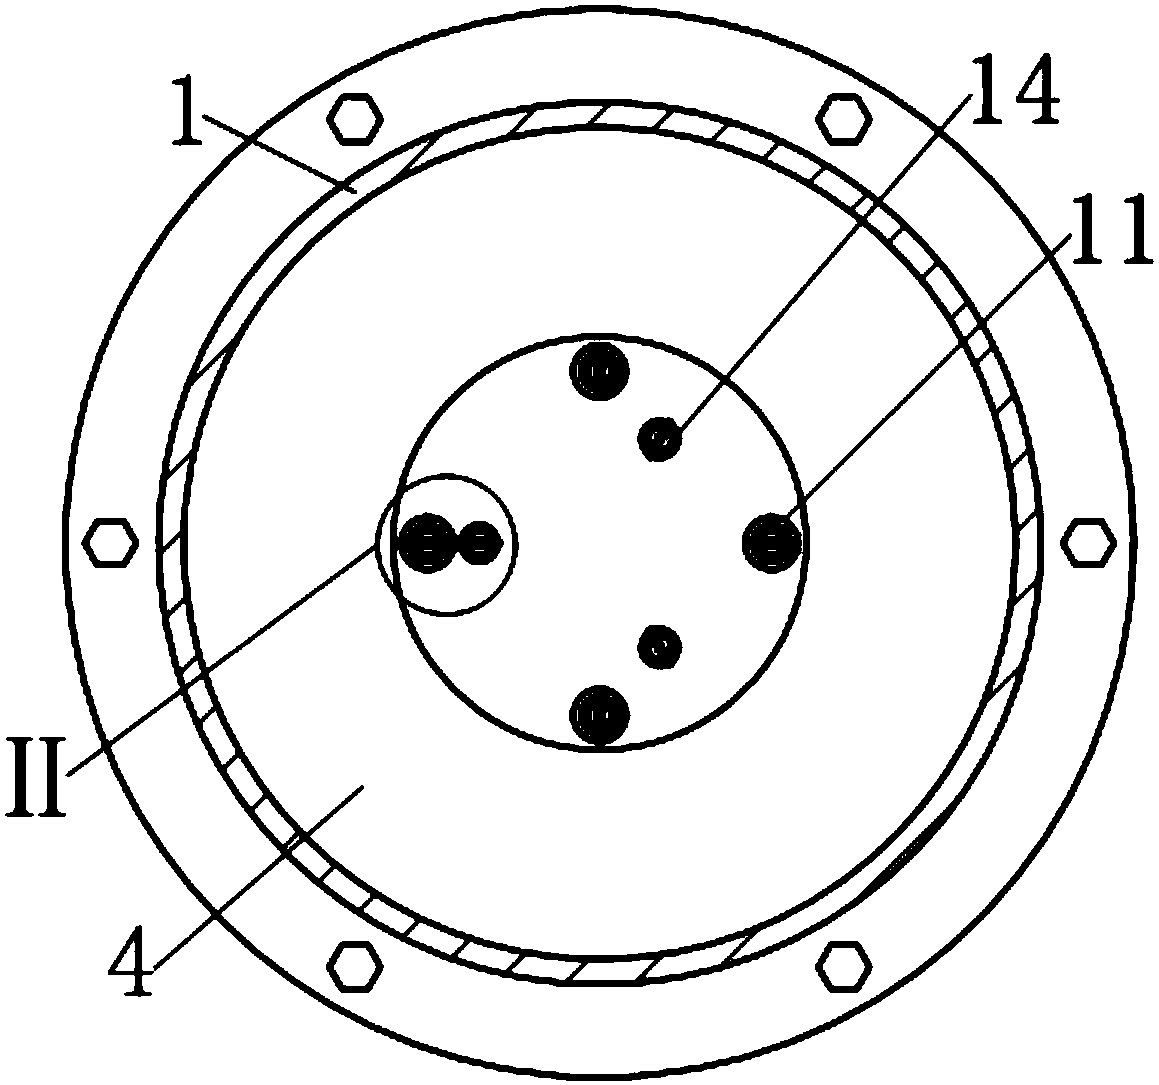 A Disc Spring Damper with Preset Early Stiffness